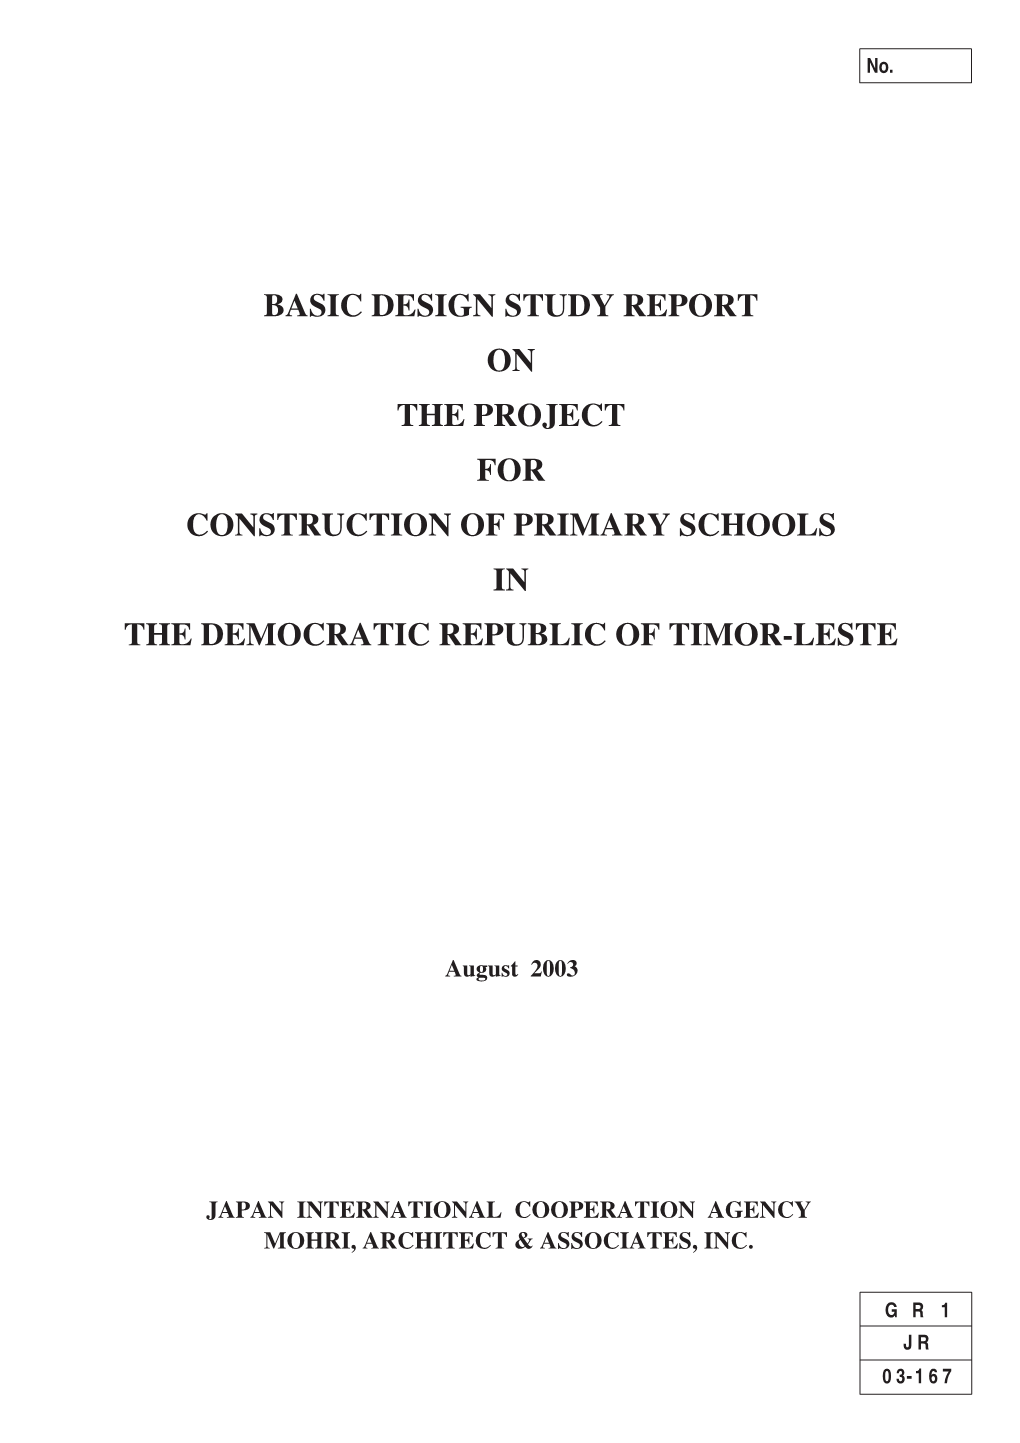 Basic Design Study Report on the Project for Construction of Primary Schools in the Democratic Republic of Timor-Leste